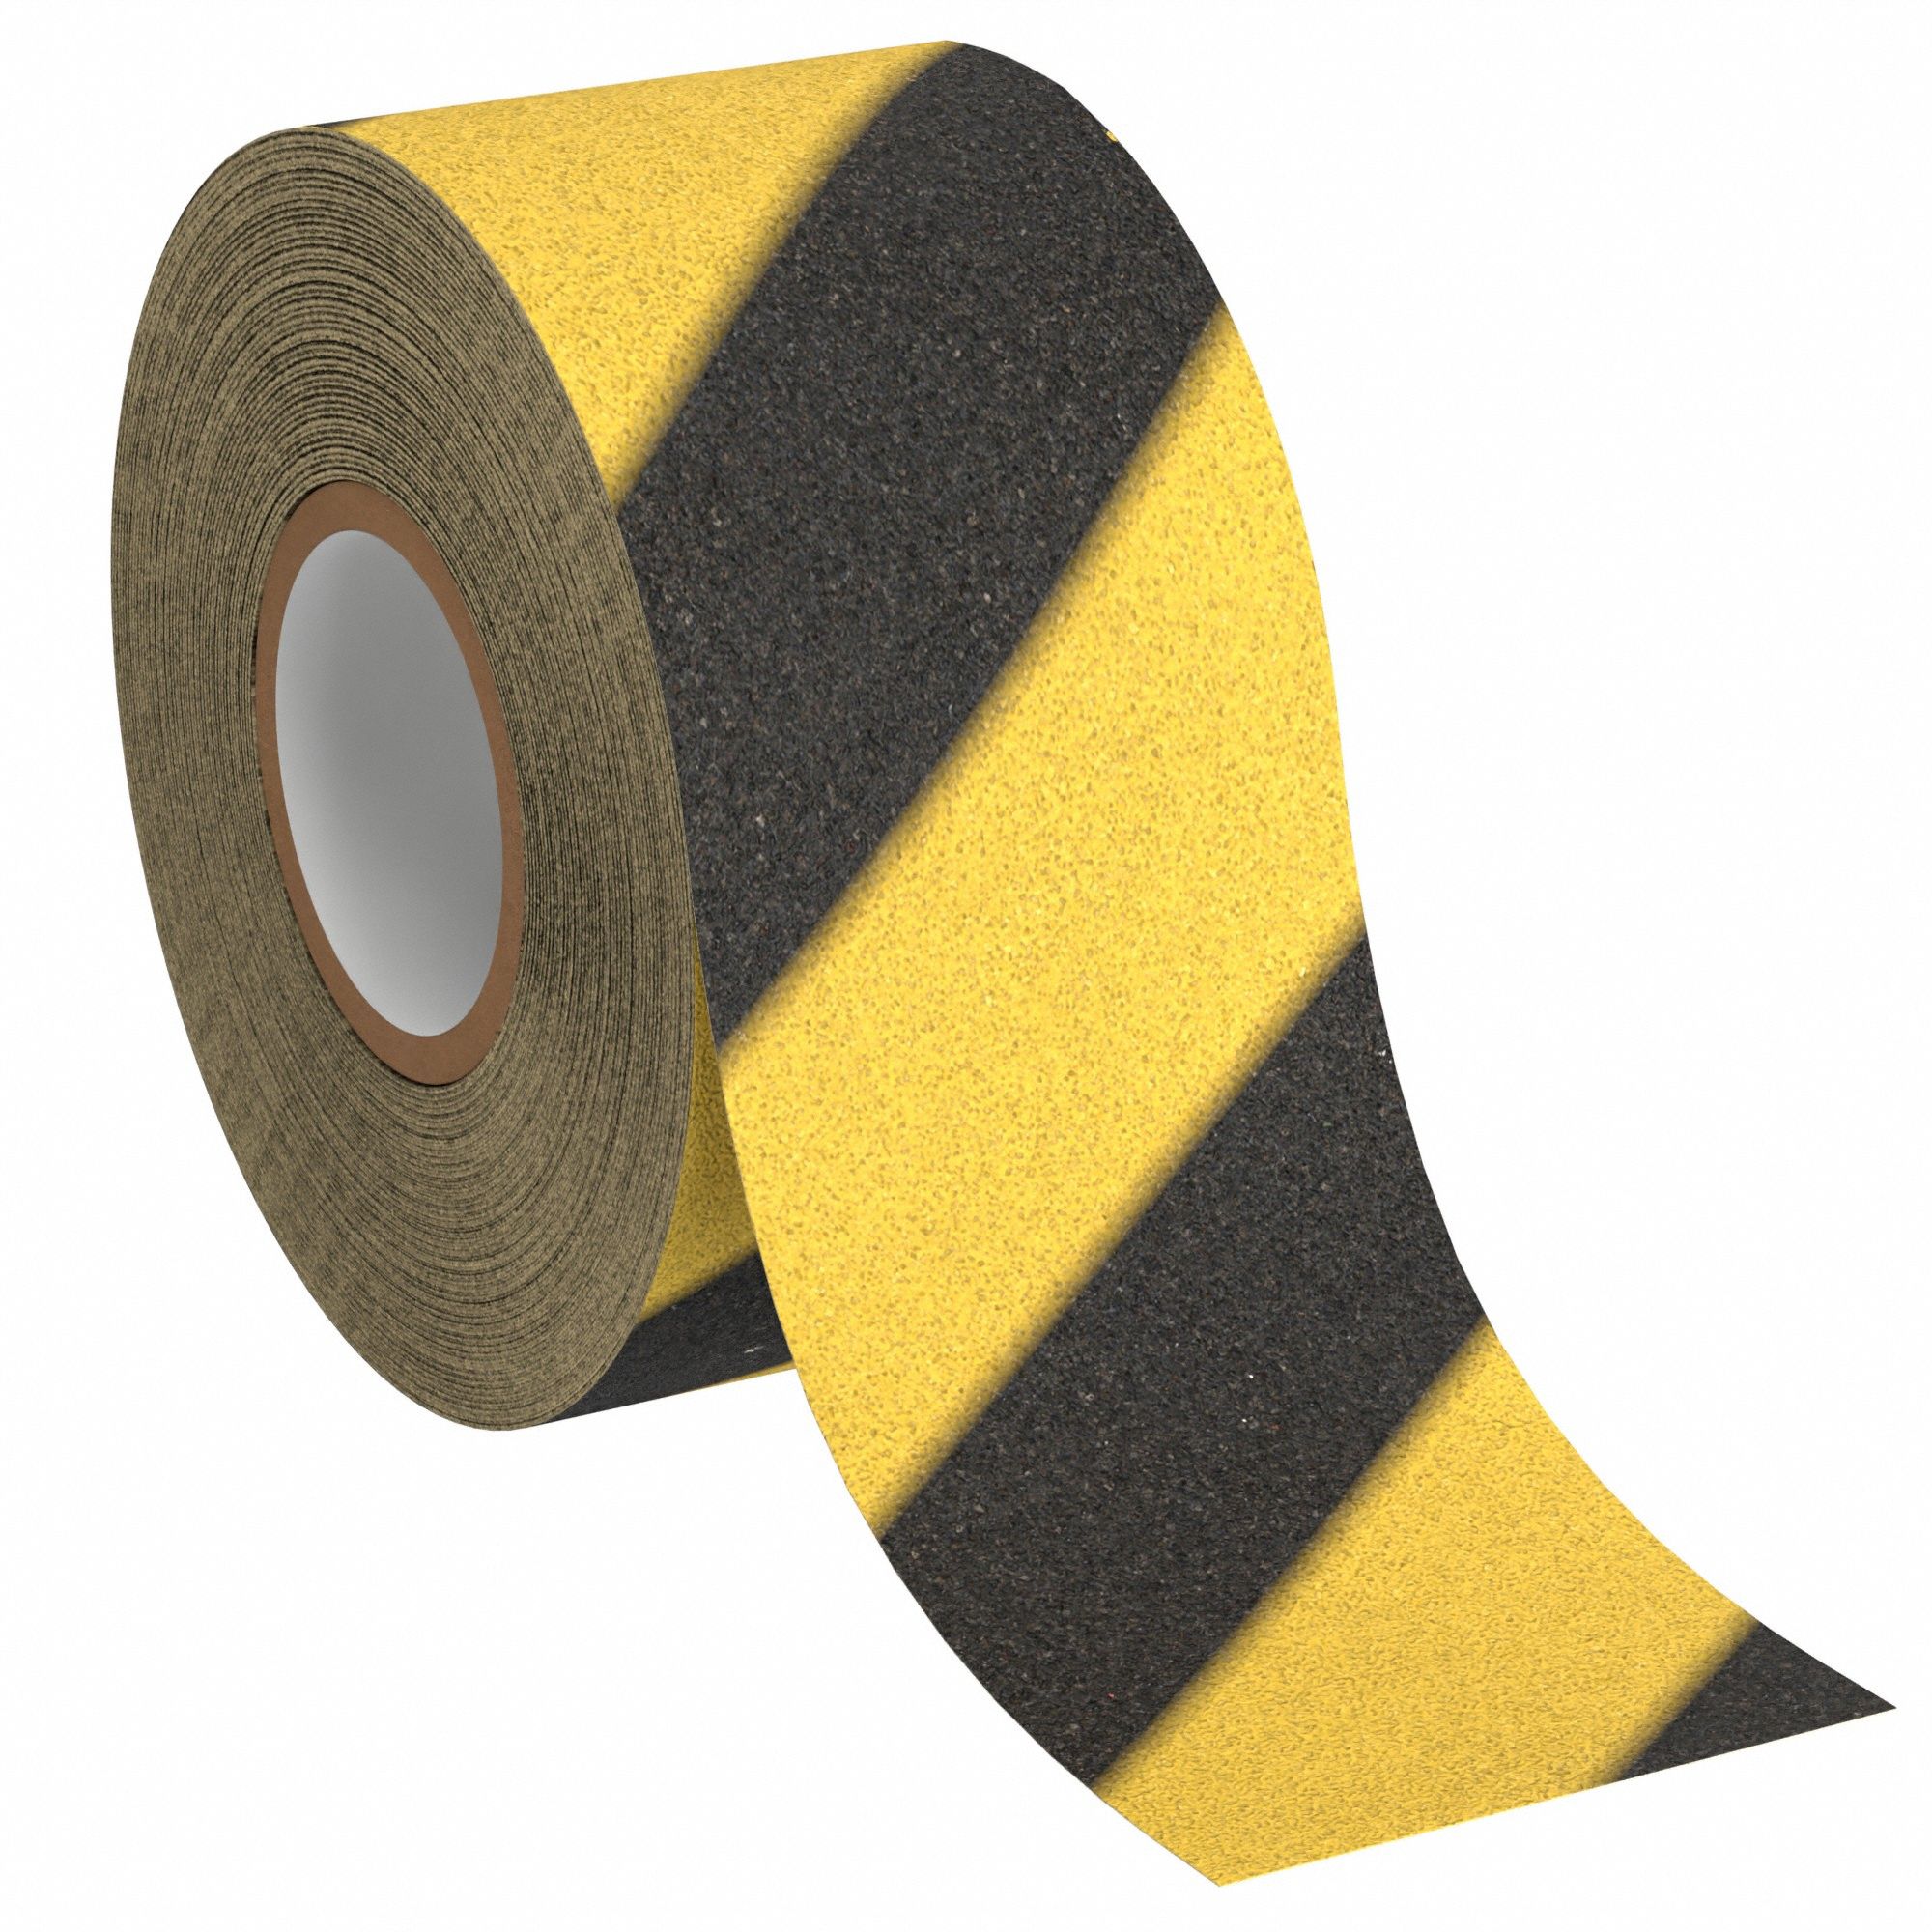 Anti-Slip Tape: Coarse, 60 Grit Size, Striped, Black/Yellow, 4 in x 60 ft,  36 mil Tape Thick, Rubber